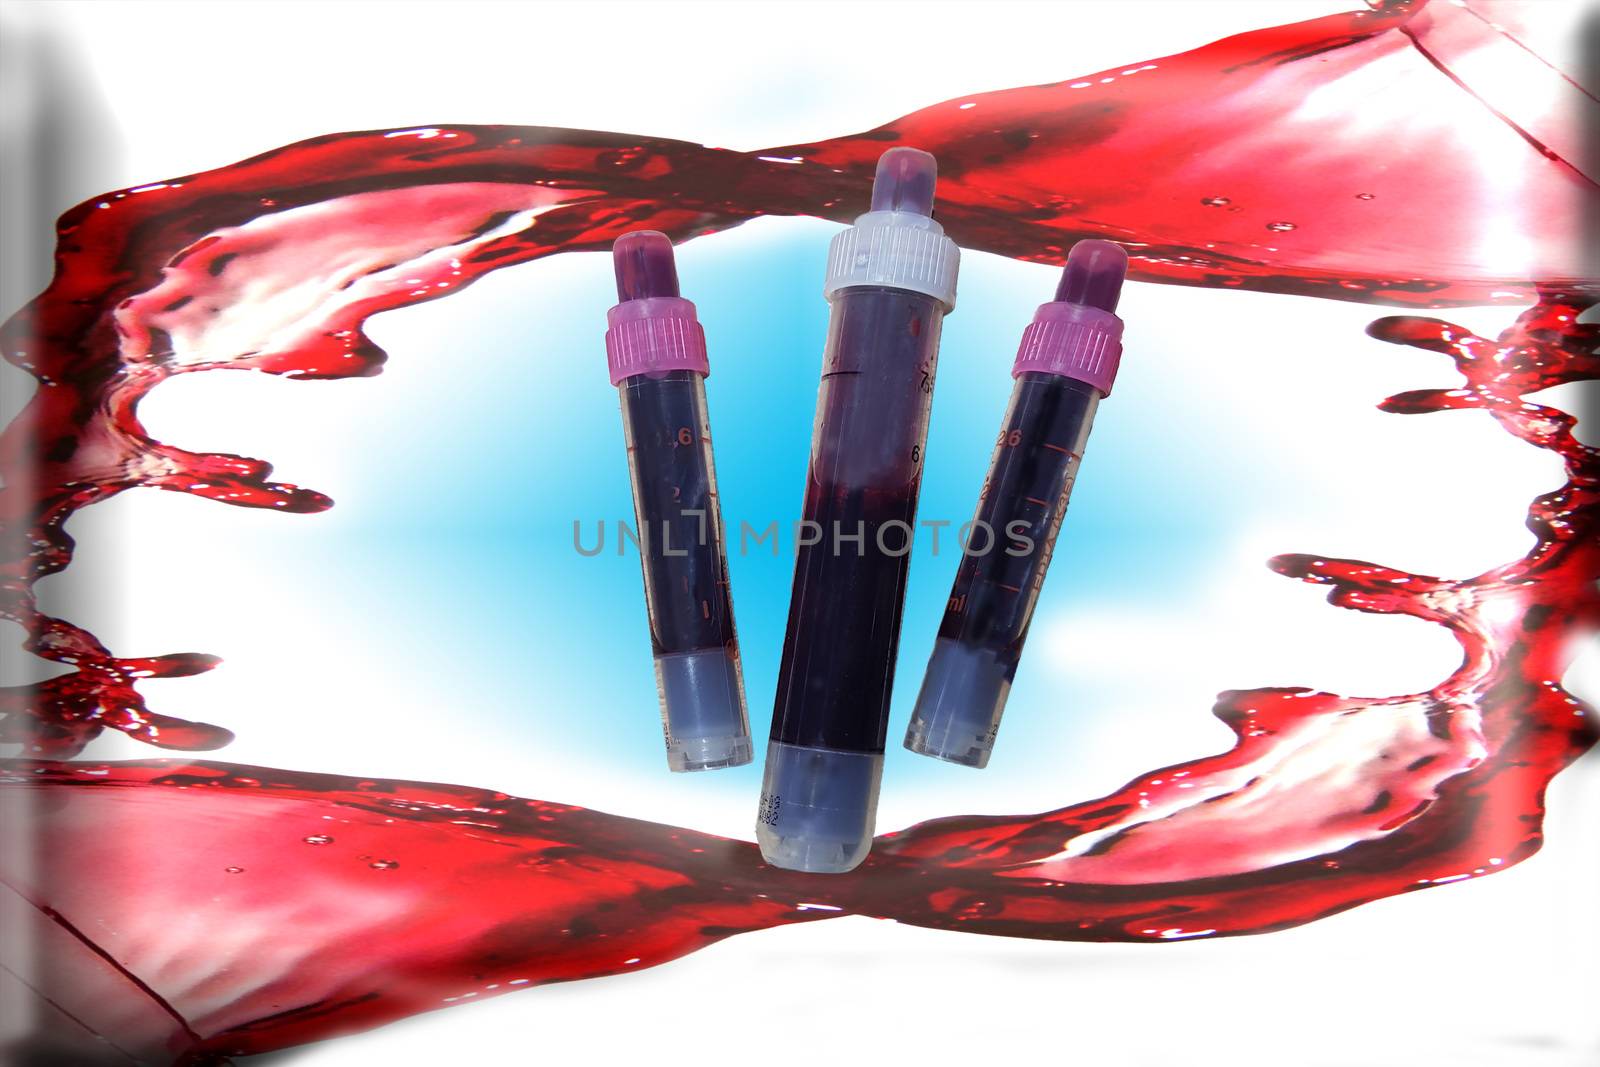 Blood collection tube filled with blood against background with blood spatter and drops. Concept blood loss.